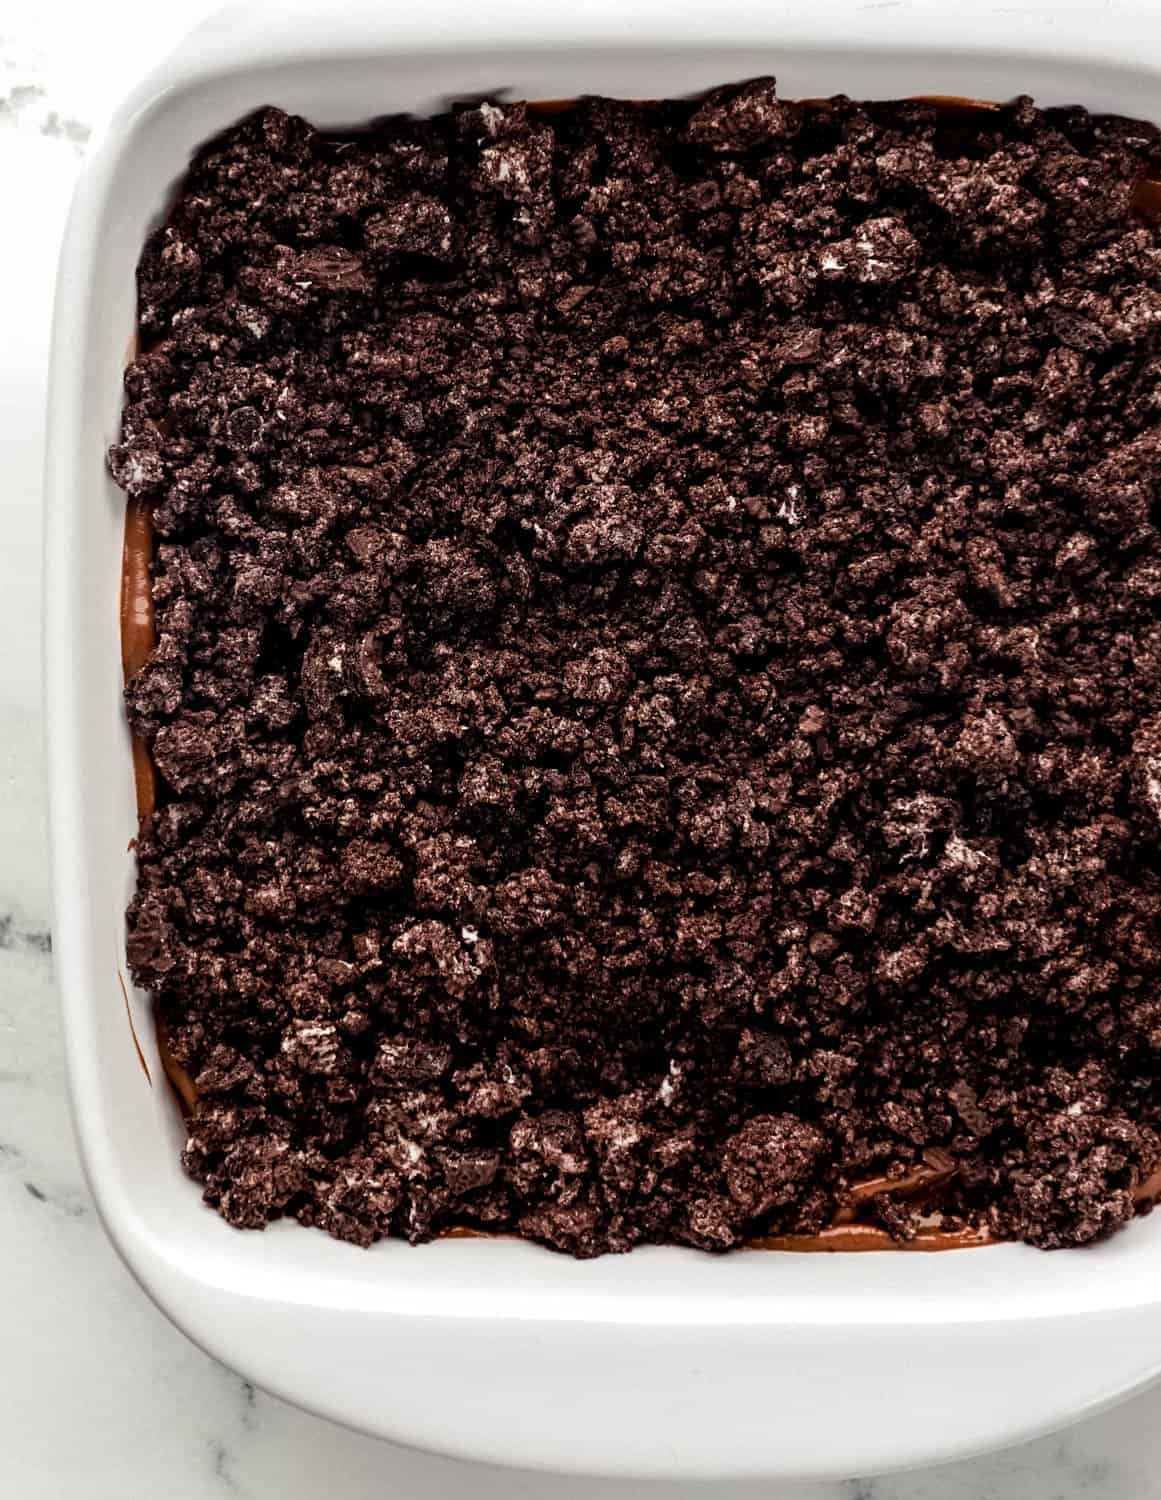 Crushed oreo cookies added on top of chocolate pudding in white baking dish. 